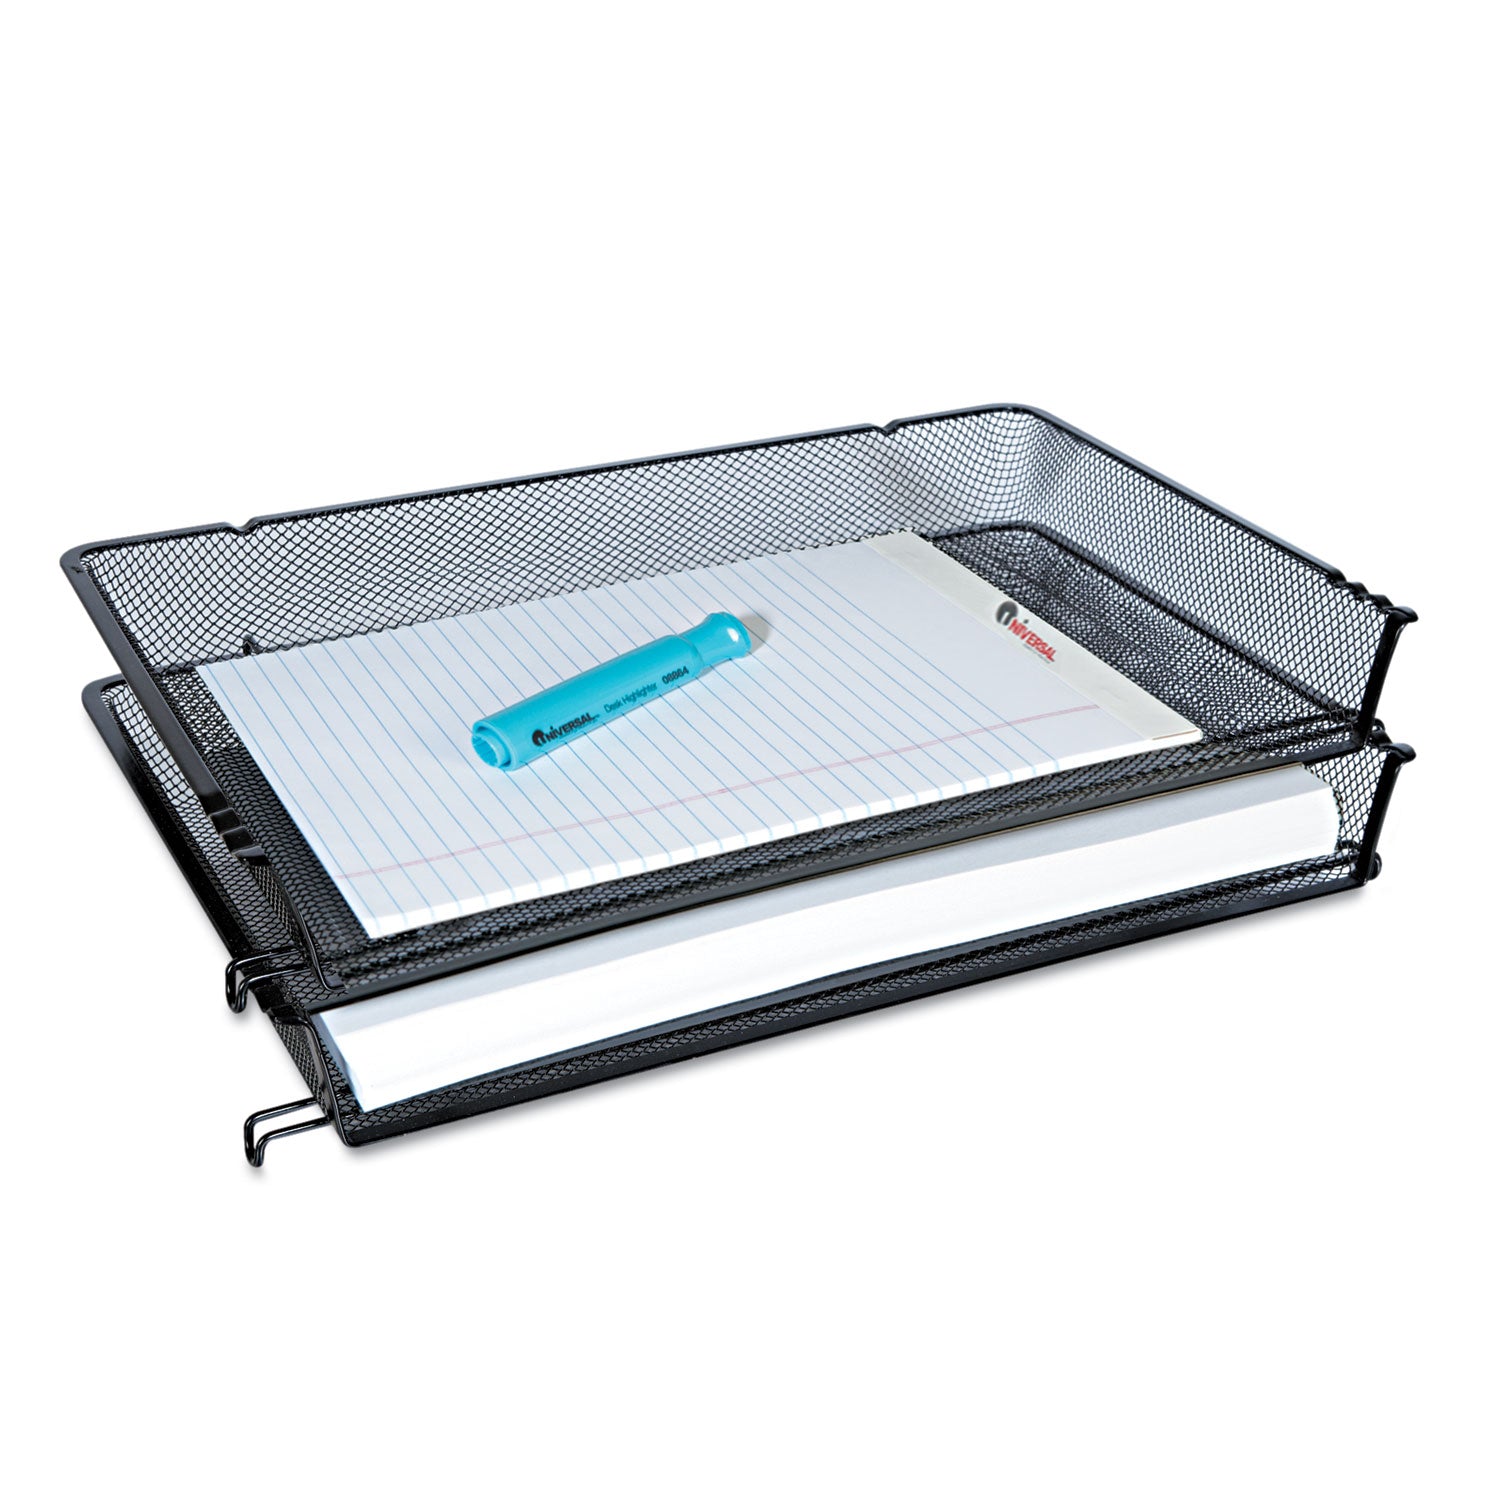 Deluxe Mesh Stacking Side Load Tray, 1 Section, Legal Size Files, 17"" x 10.88"" x 2.5"", Black - Flipcost